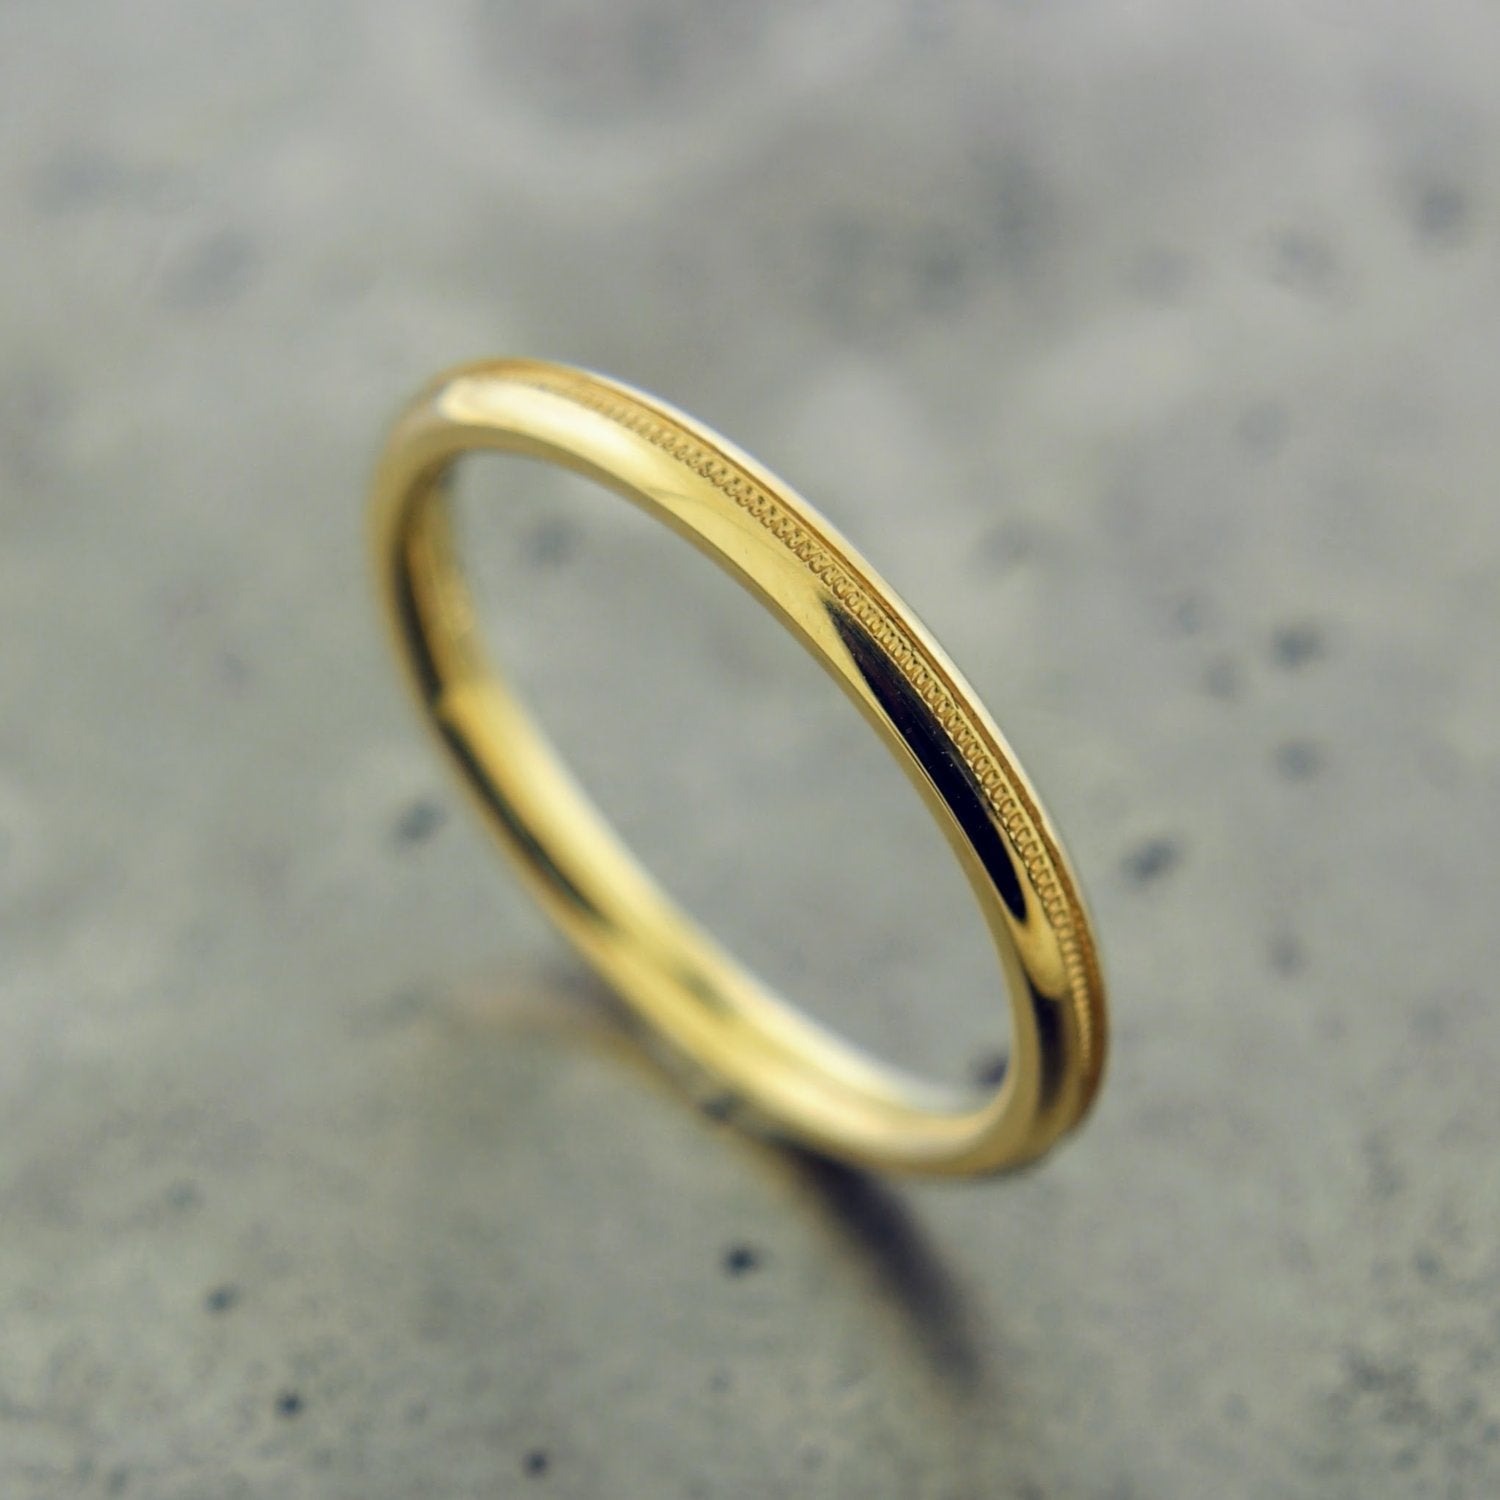 14 karat yellow gold ring. This ring features milgraine beading in the center of the band that circles the entirety of the ring. This ring features an angled knives edge to the ring, where it is angled about 45 degrees on the outer edges and showcases the milgraine detailing in the center of the knives edge. The ring features a high polished finish. This ring lays on a gray background.  